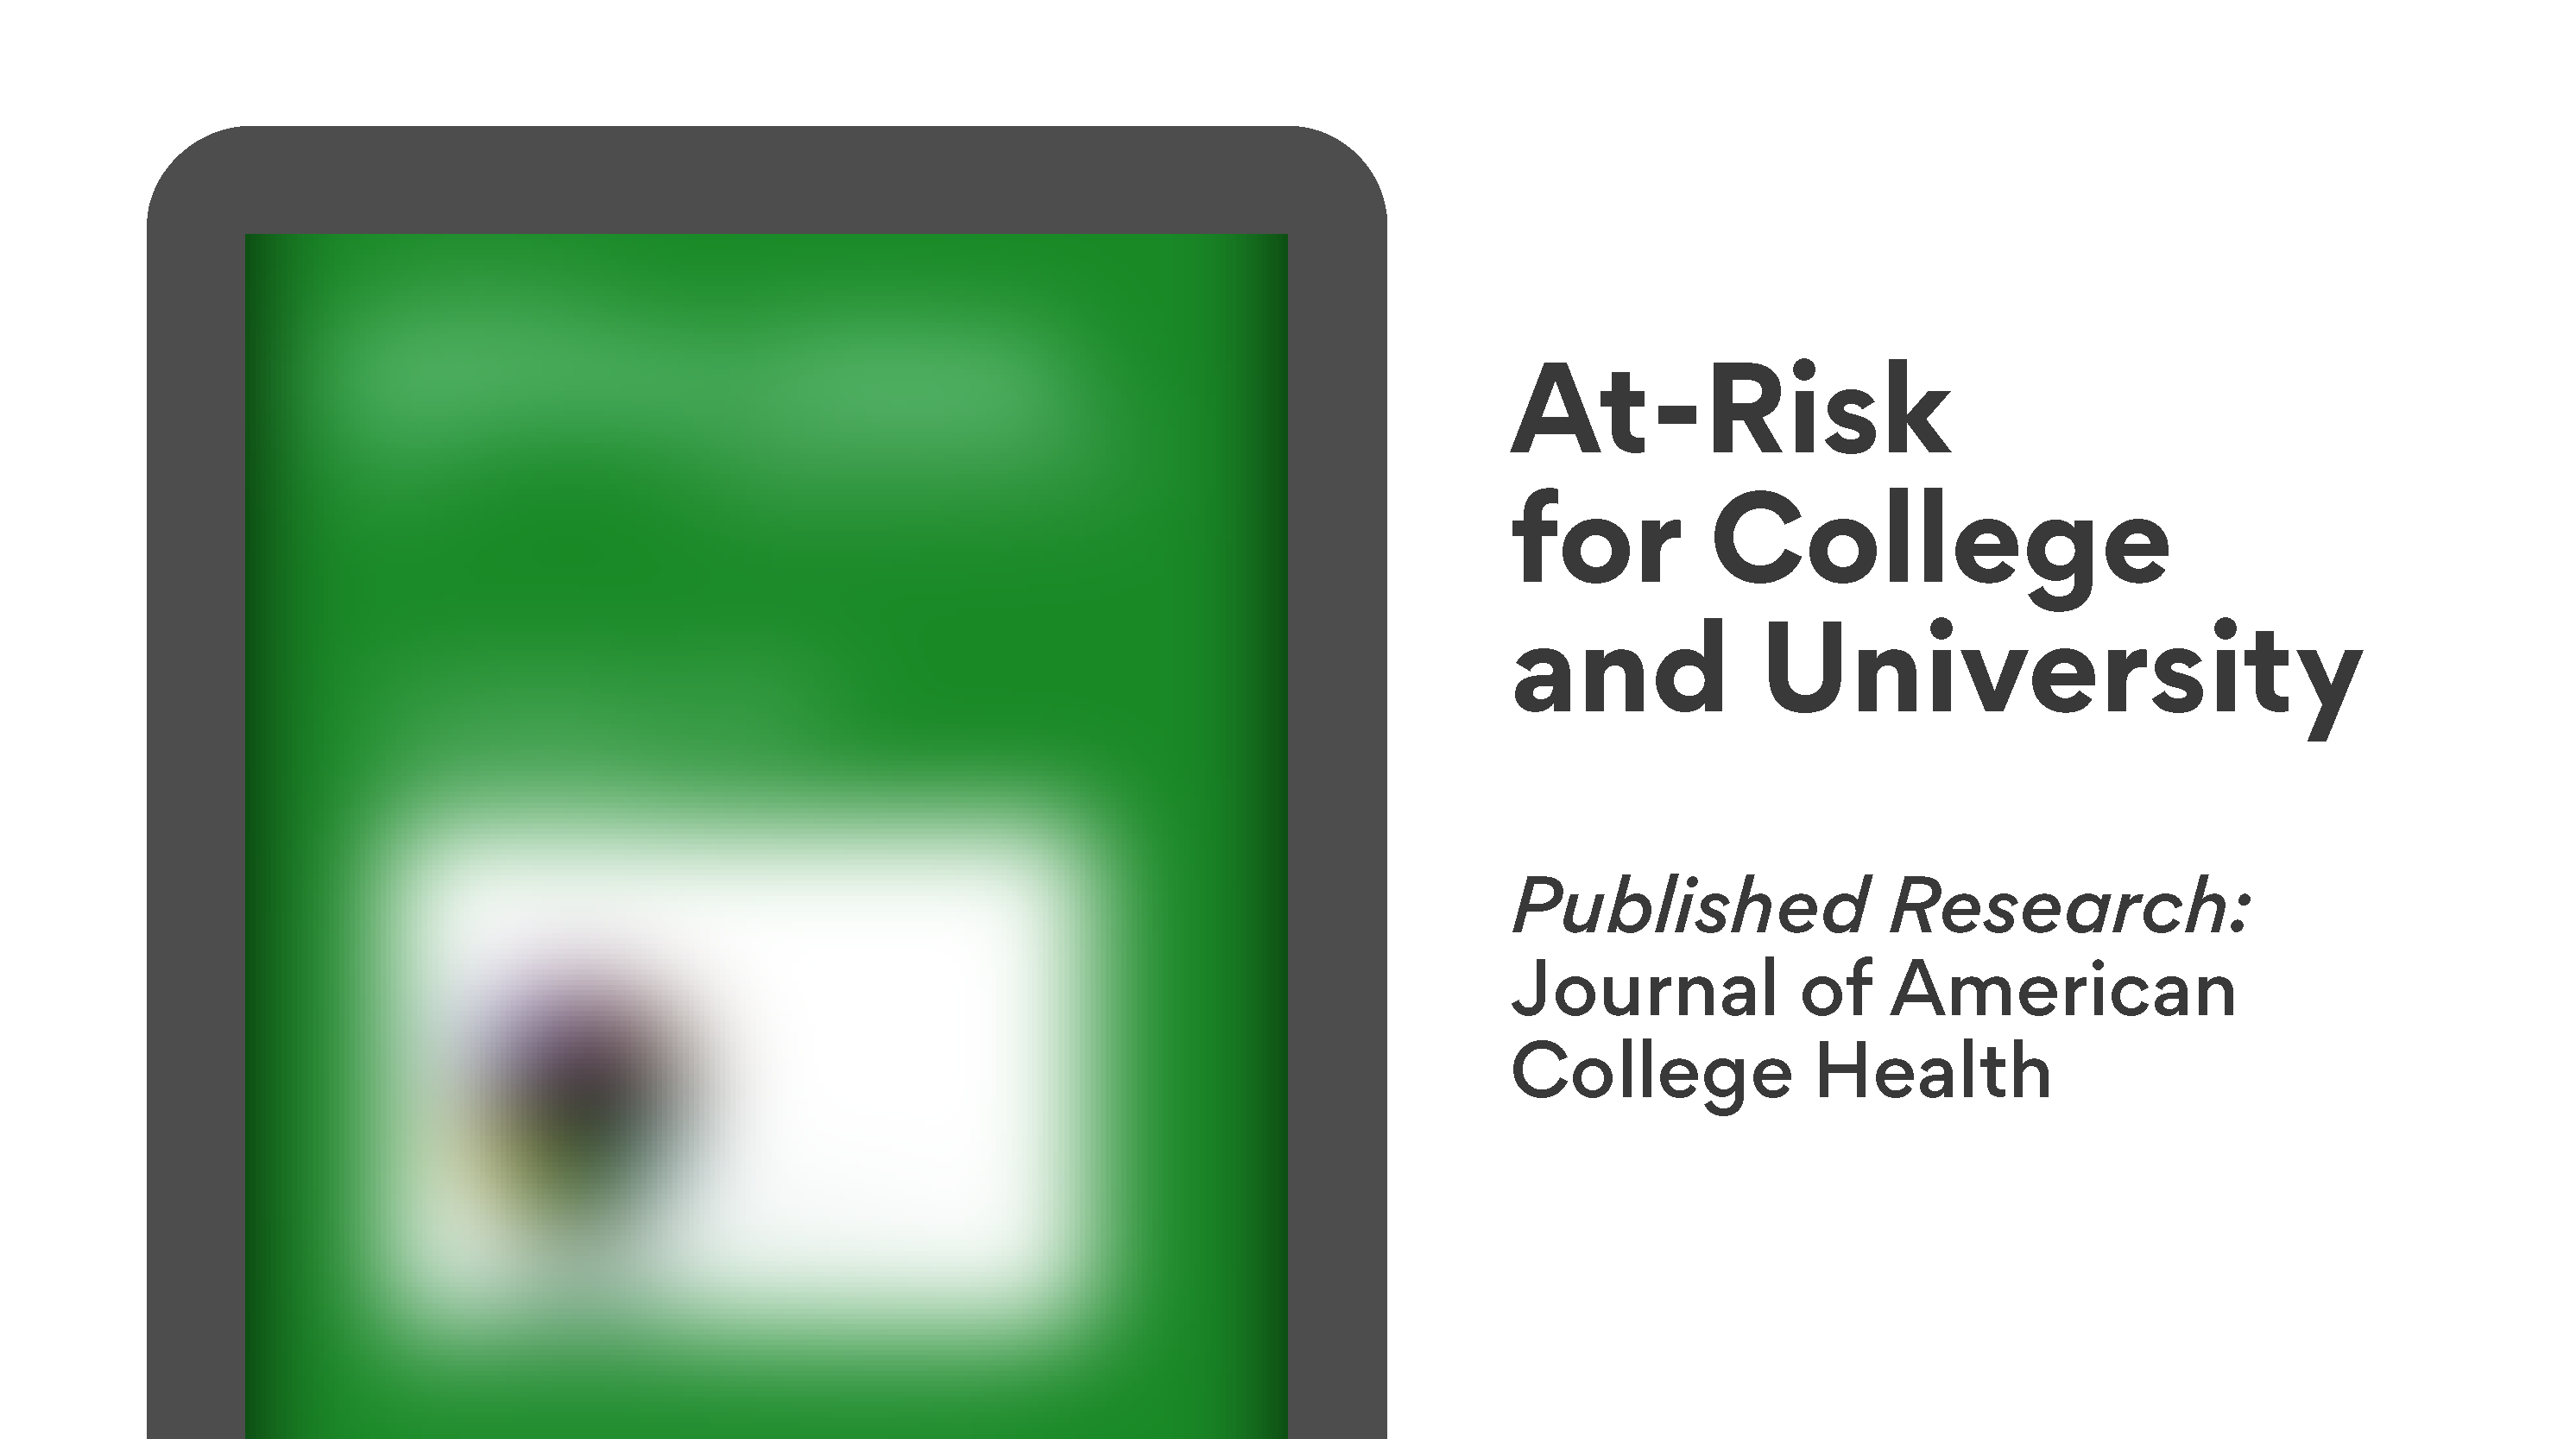 At-Risk for College & University